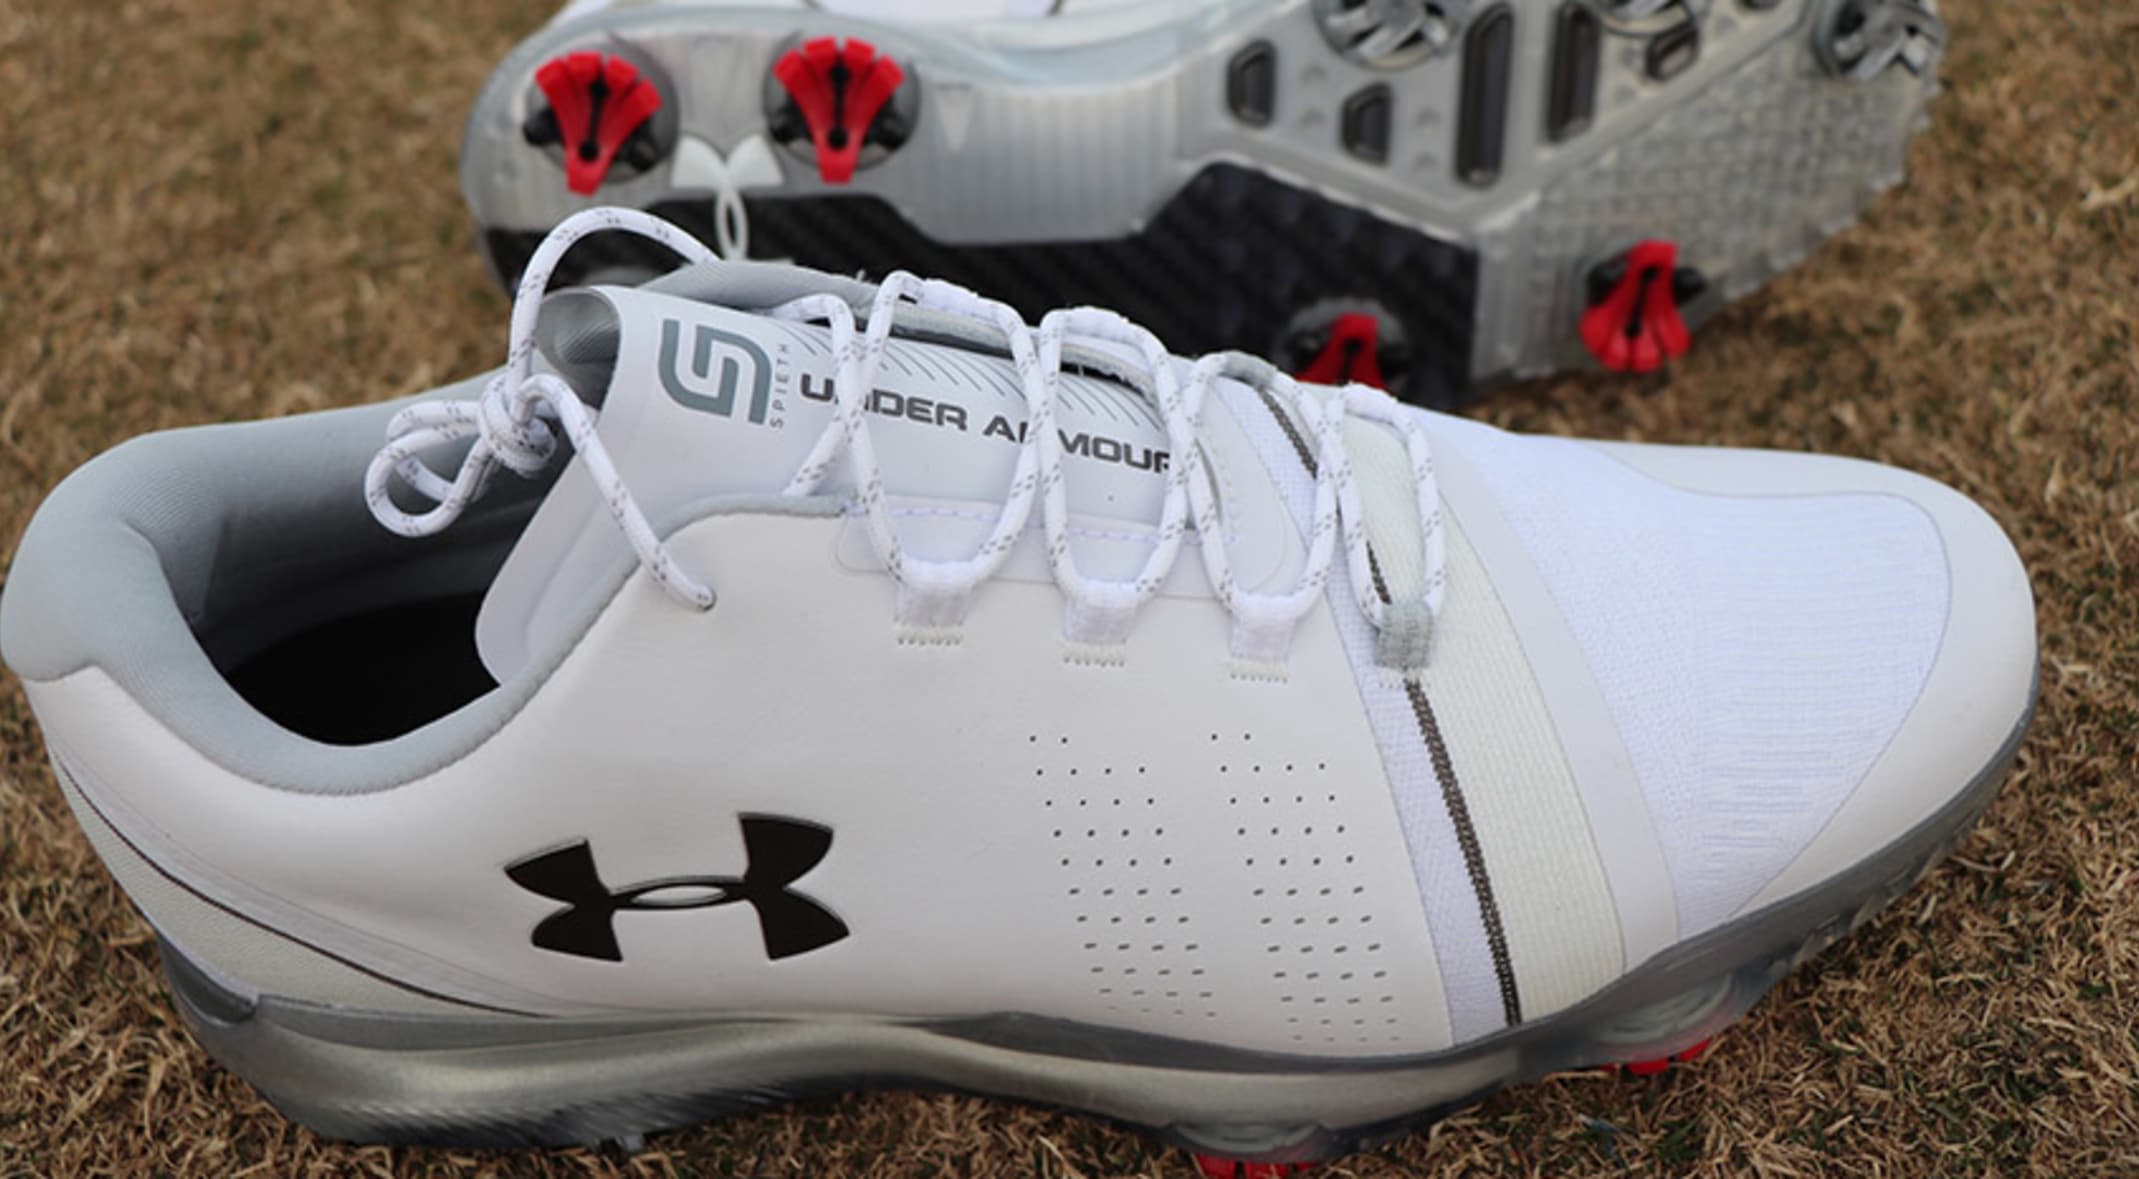 Under Armour's new Spieth 3 golf shoes 